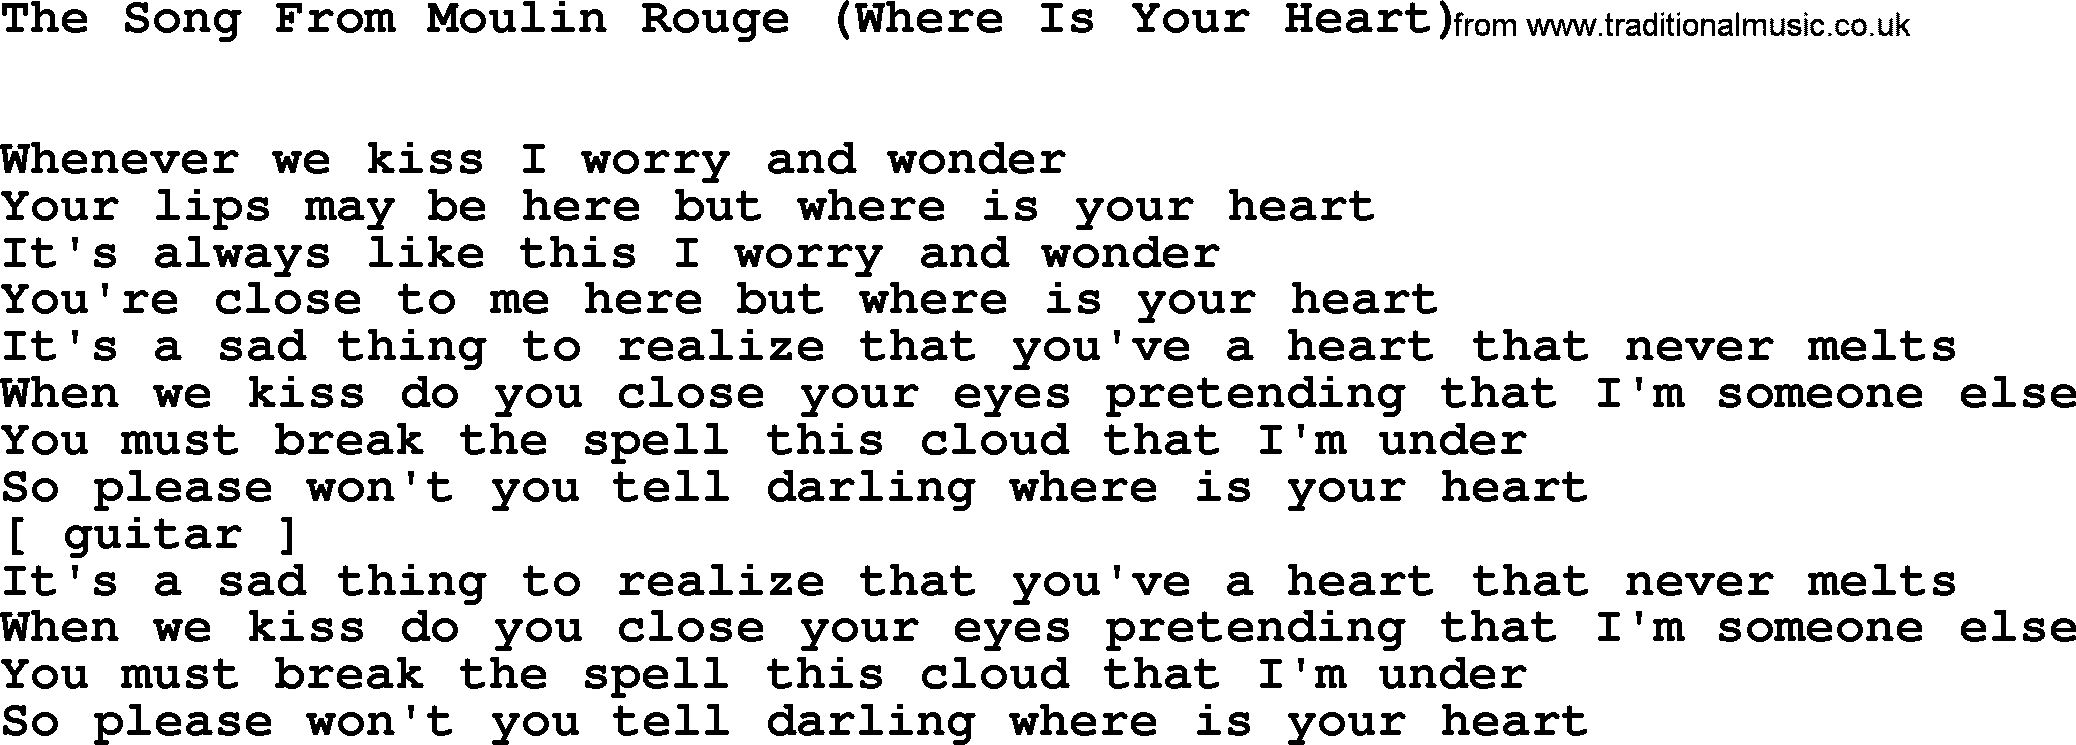 Willie Nelson song: The Song From Moulin Rouge (Where Is Your Heart) lyrics